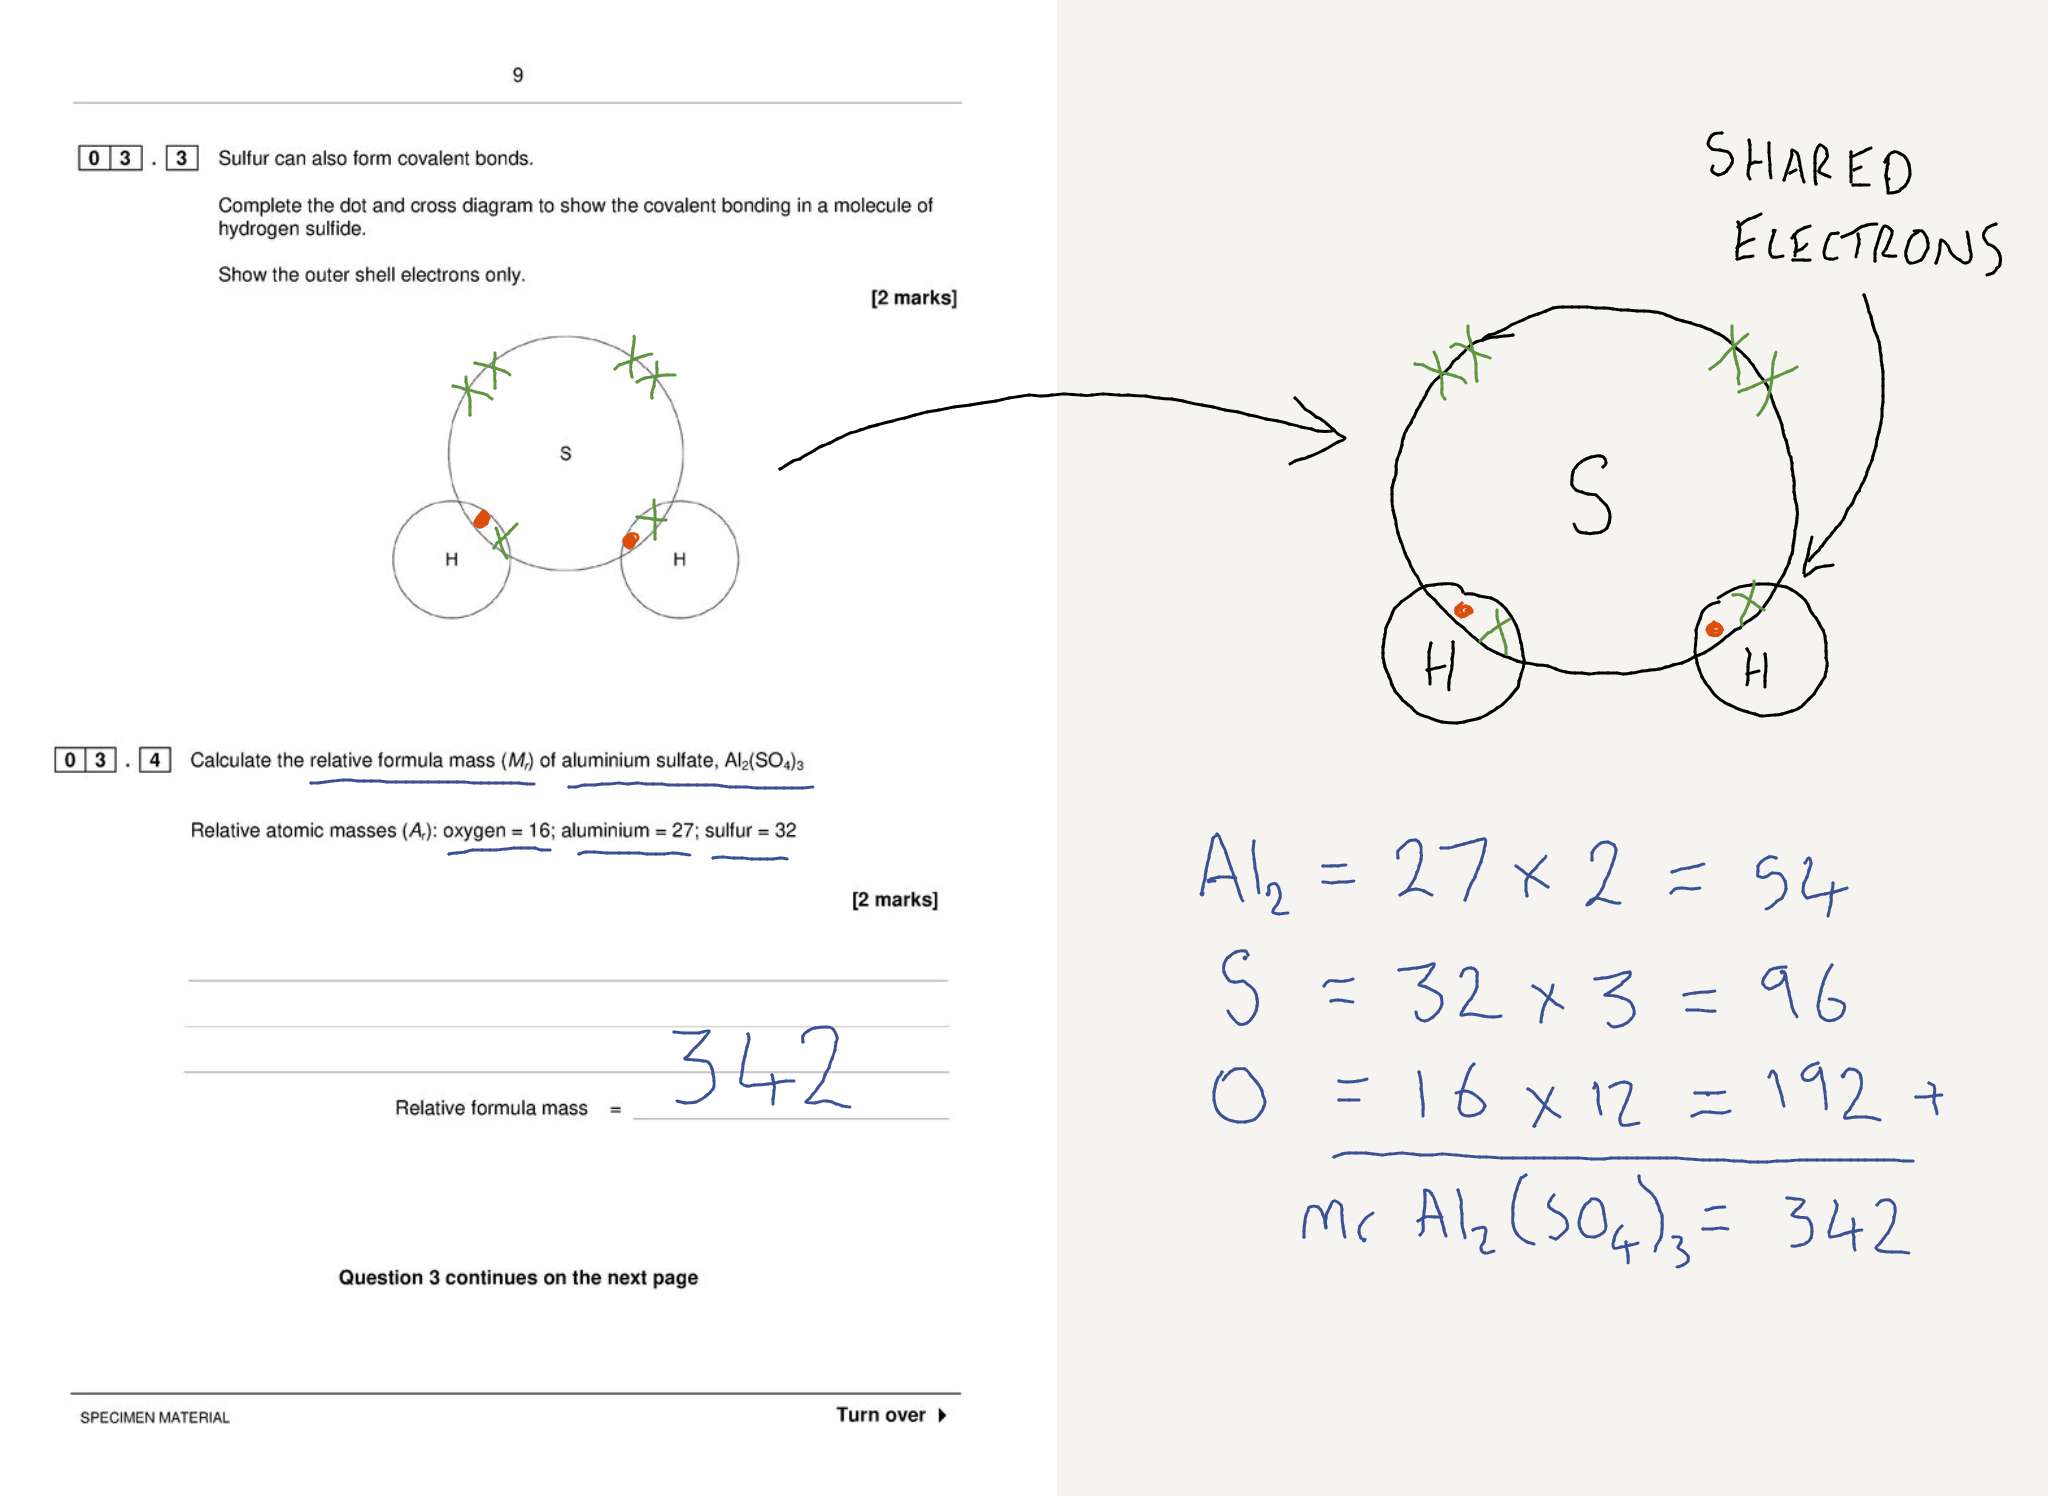 picture of a written exam answer drawn in Bramble using a Microsoft Surface Pro 7 and pen